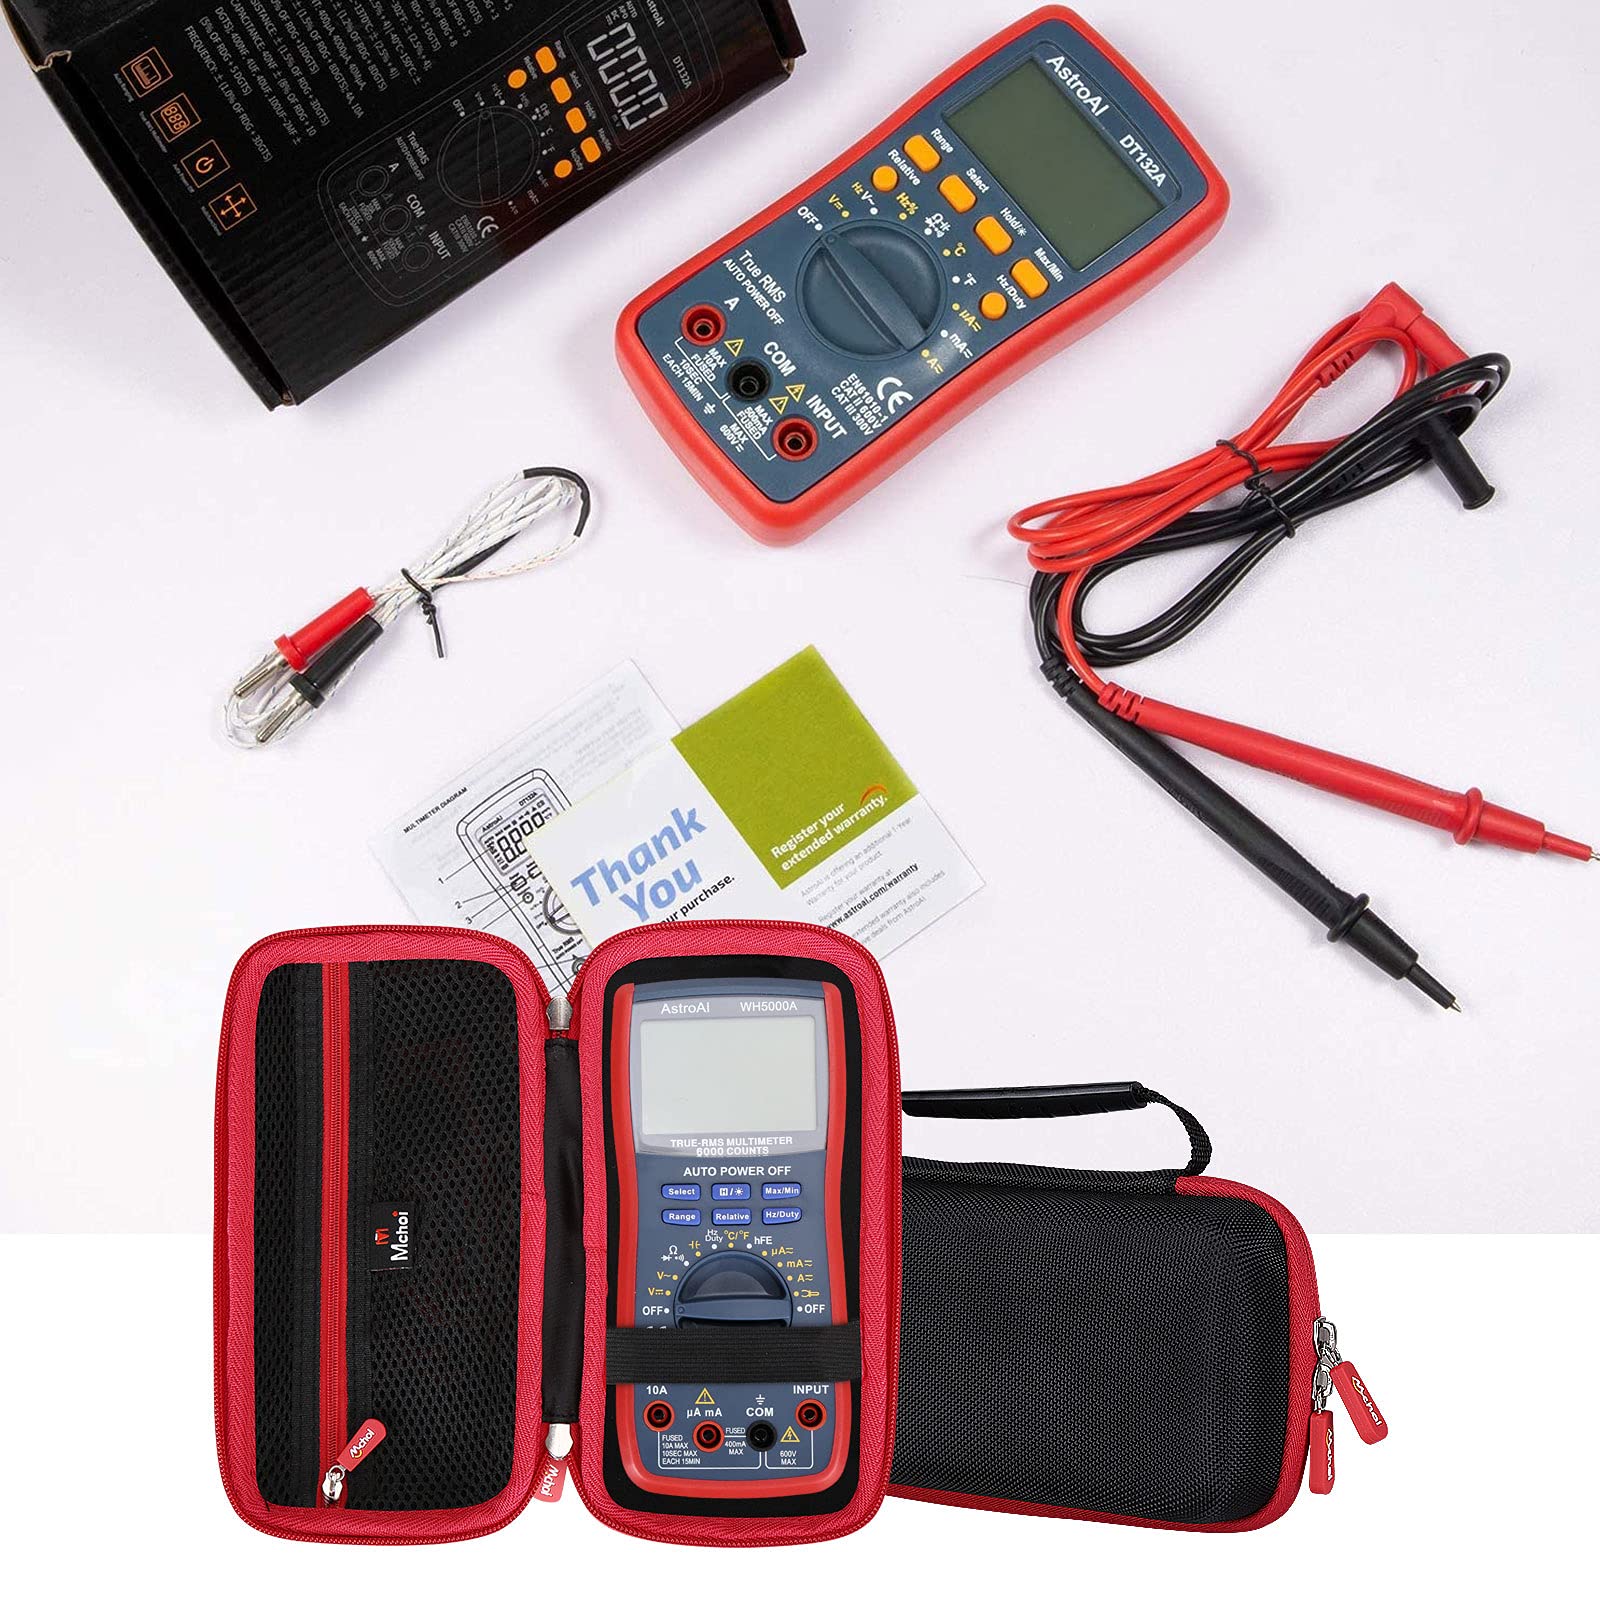 Mchoi Hard Portable Case Compatible with AstroAI Digital Multimeter TRMS 6000 Counts Volt Meter,CASE ONLY